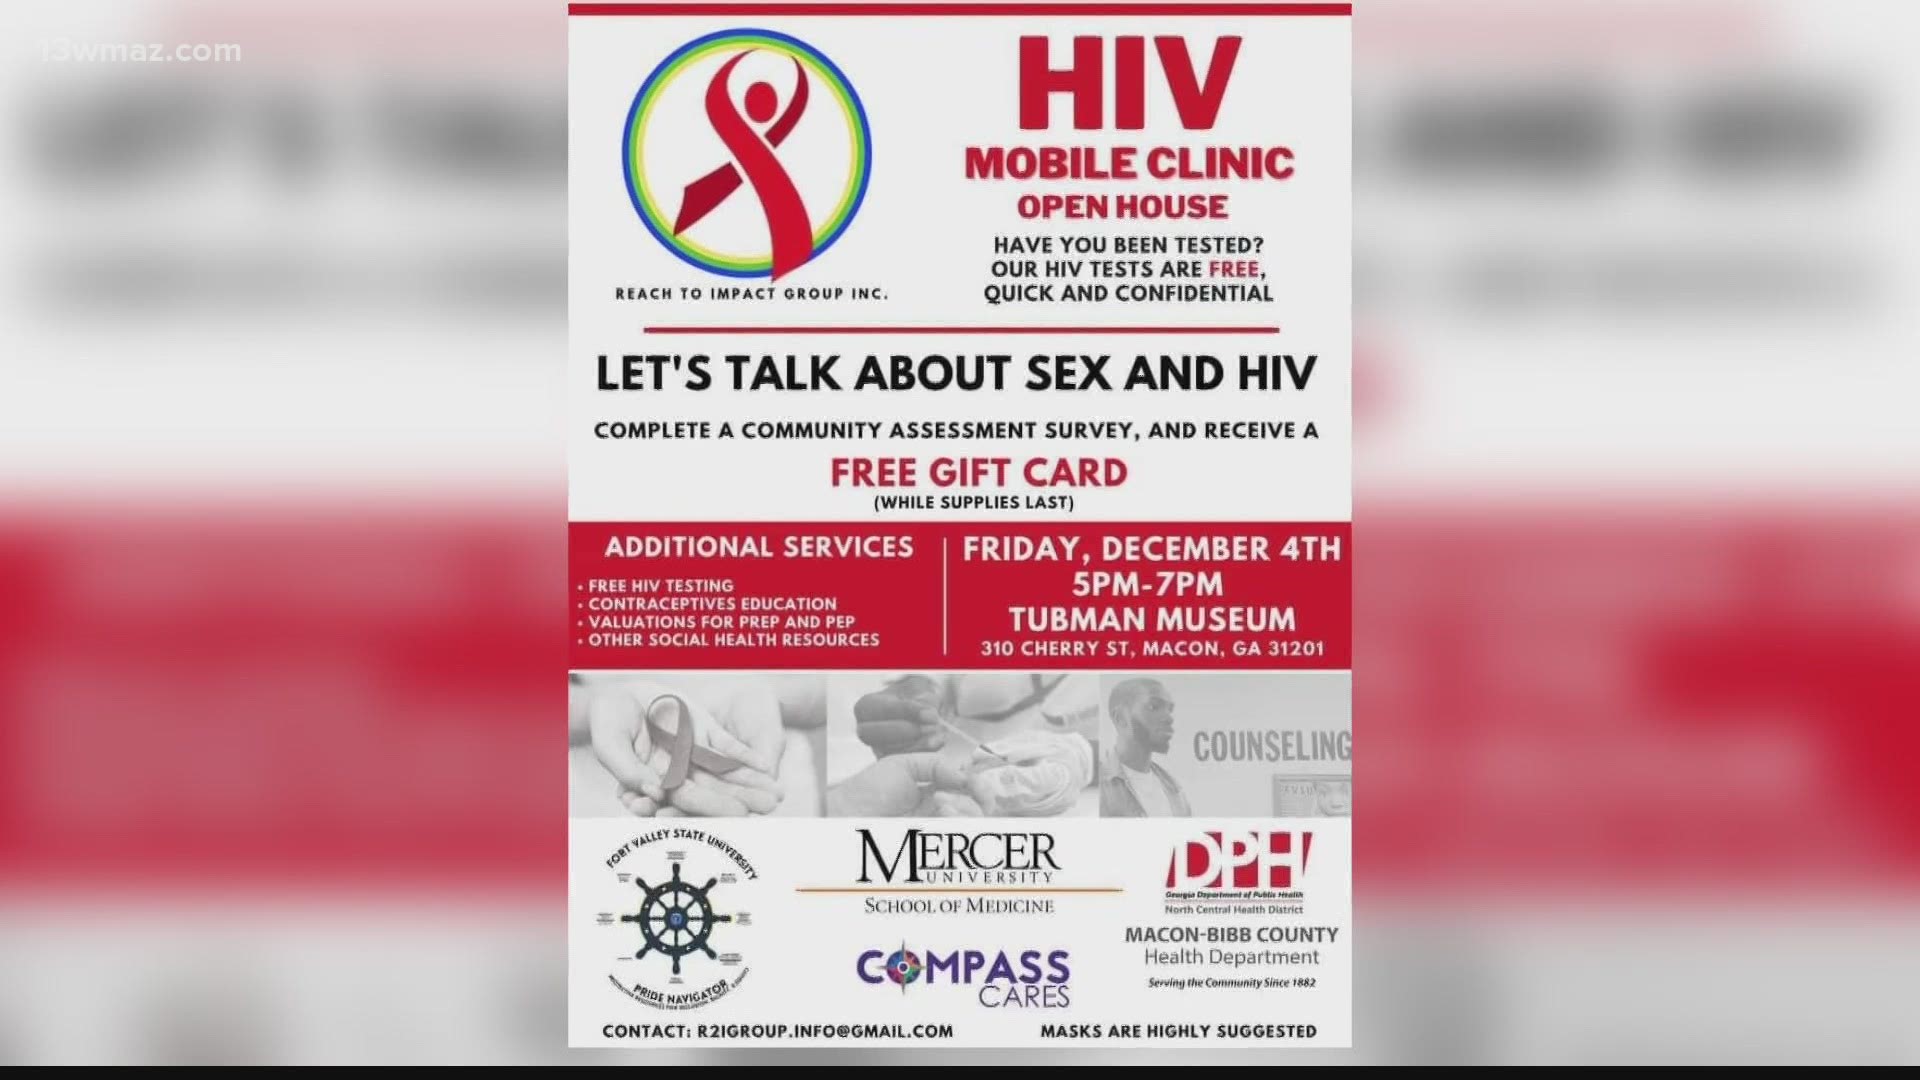 On Friday, people from around Central Georgia will have an opportunity to get tested for HIV at a mobile clinic located at the Tubman Museum from 5 p.m. to 7 p.m.